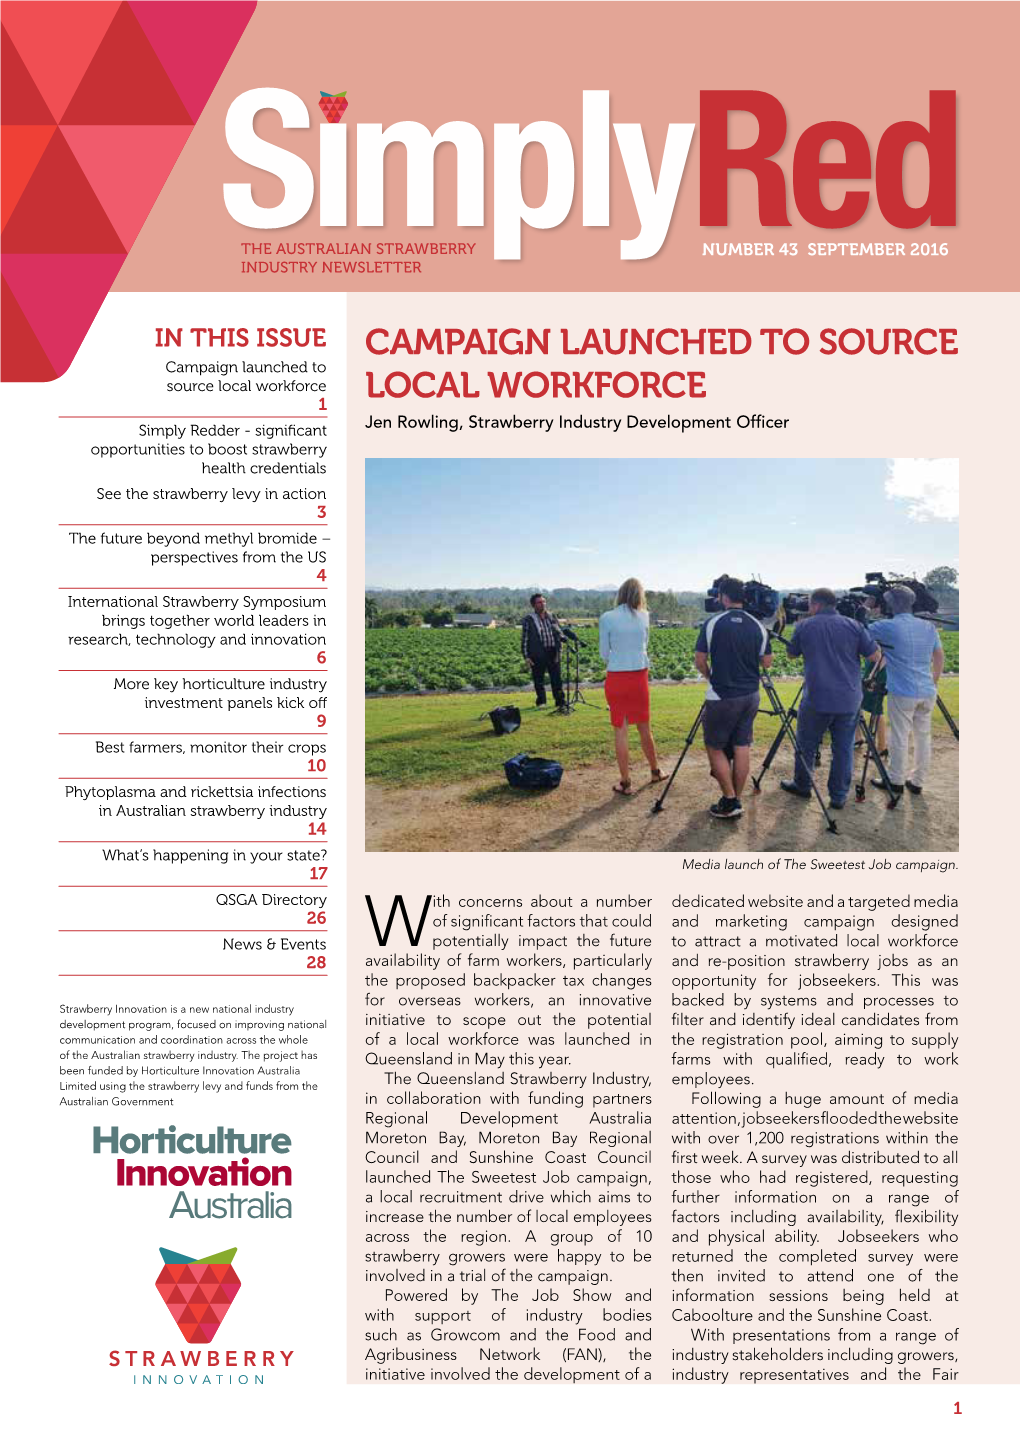 Campaign Launched to Source Local Workforce